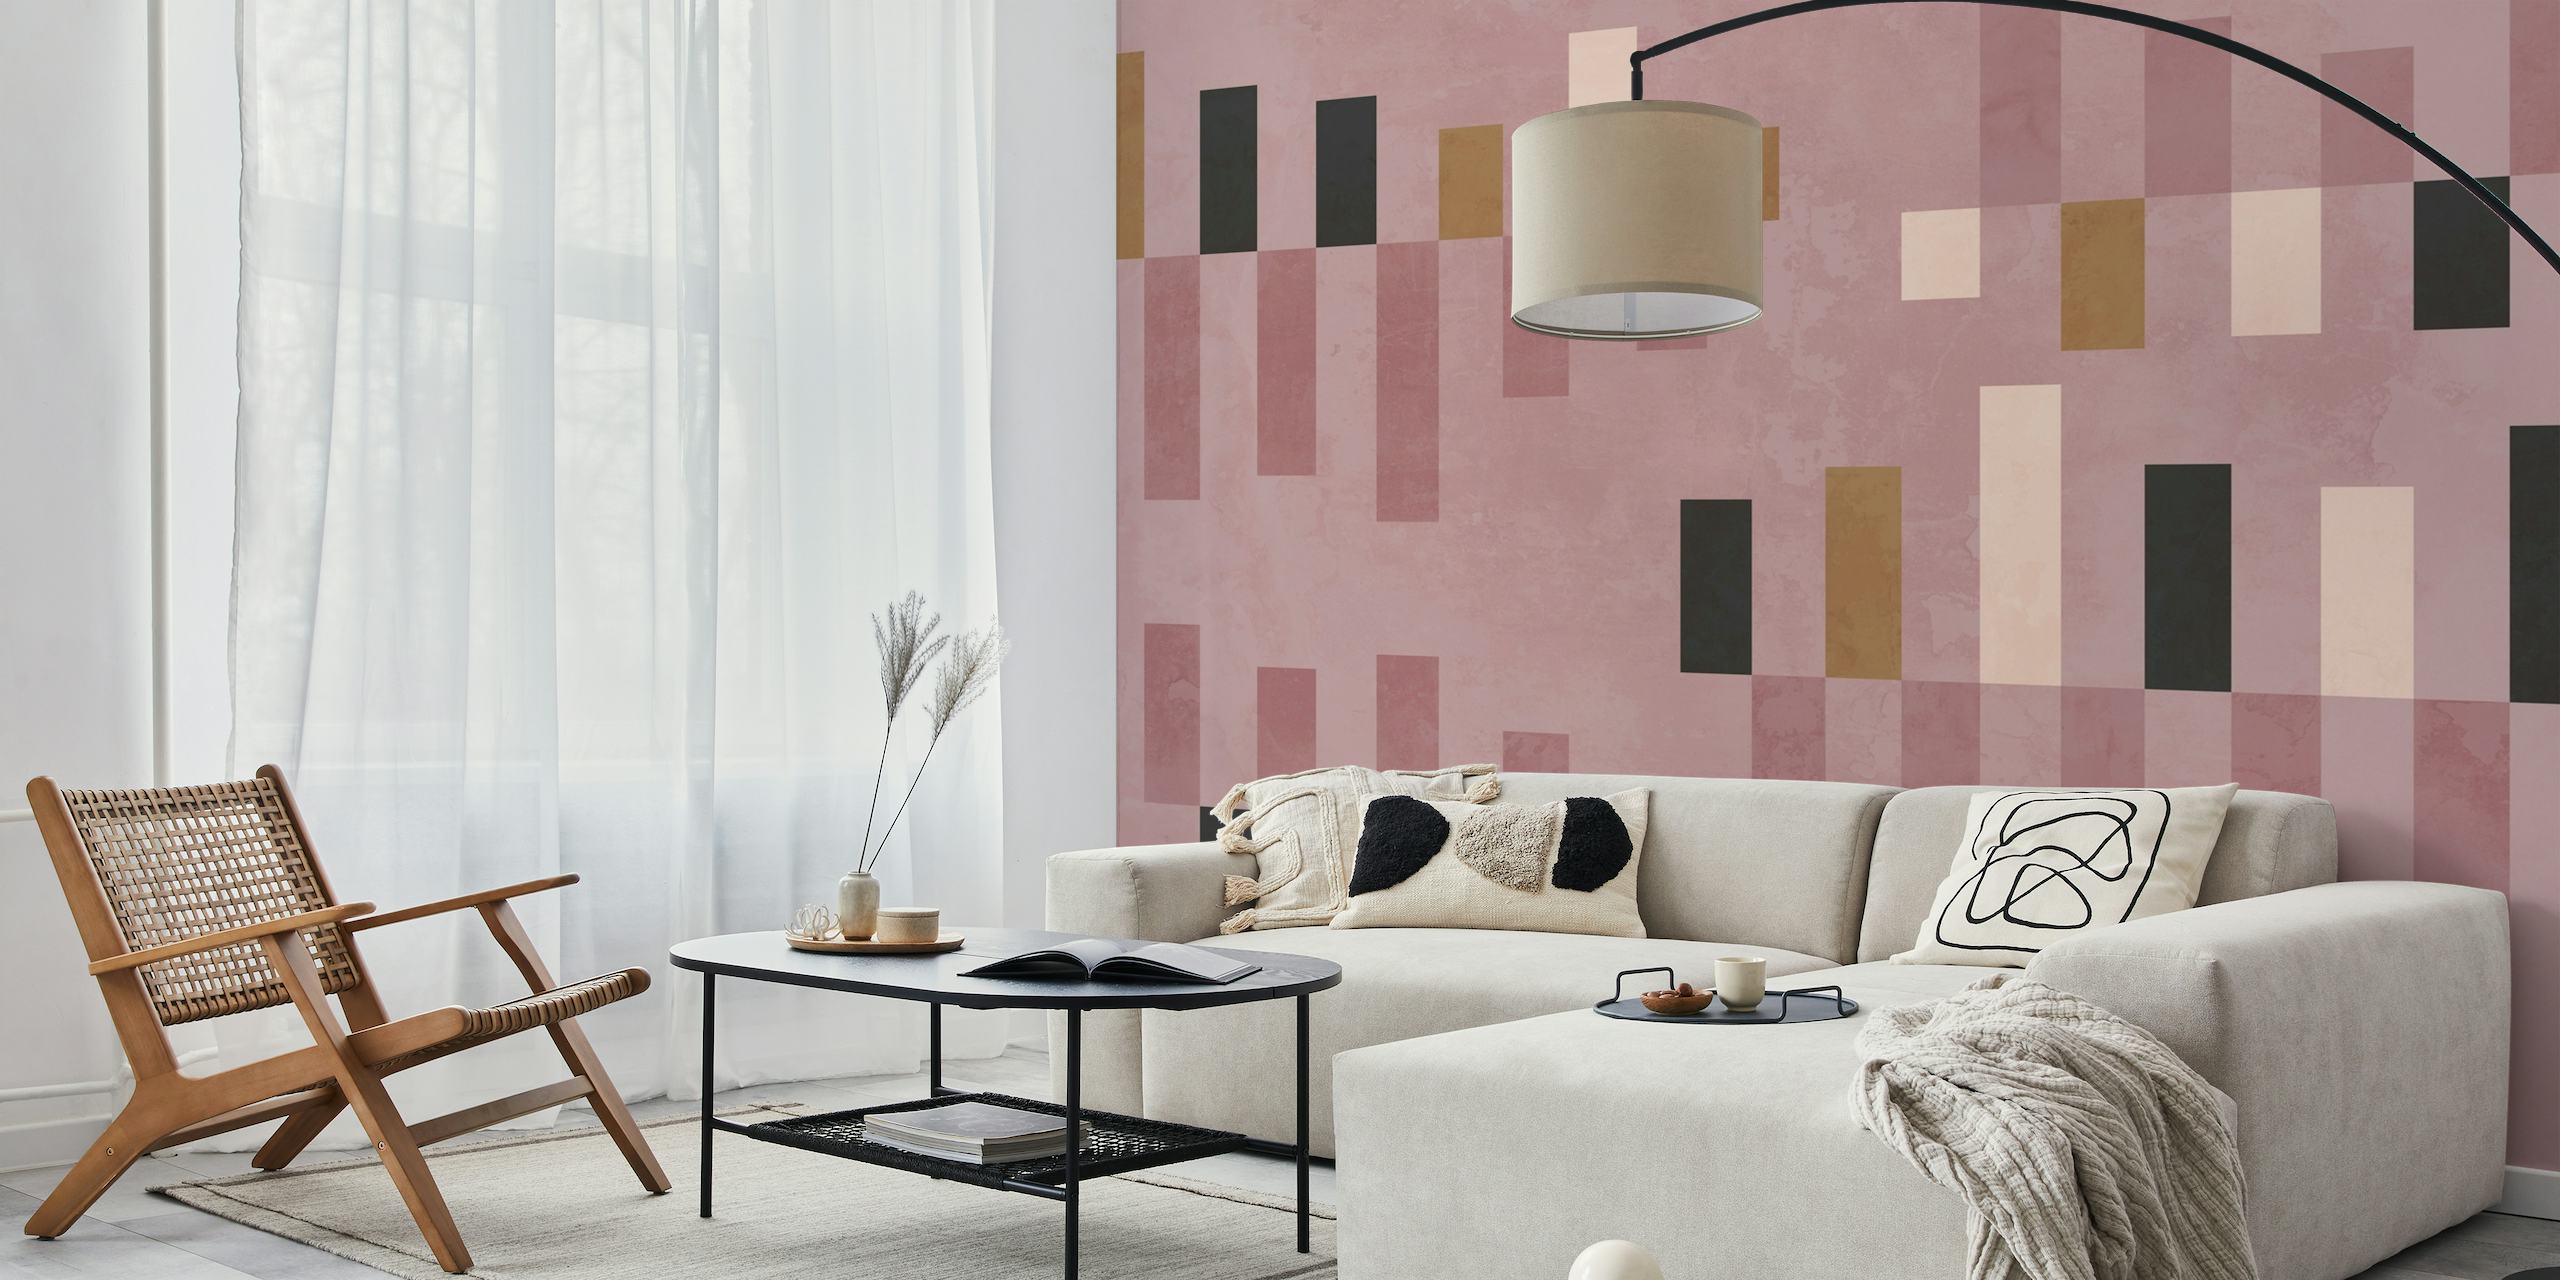 Abstract geometric shapes resembling piano keys in muted tones wall mural